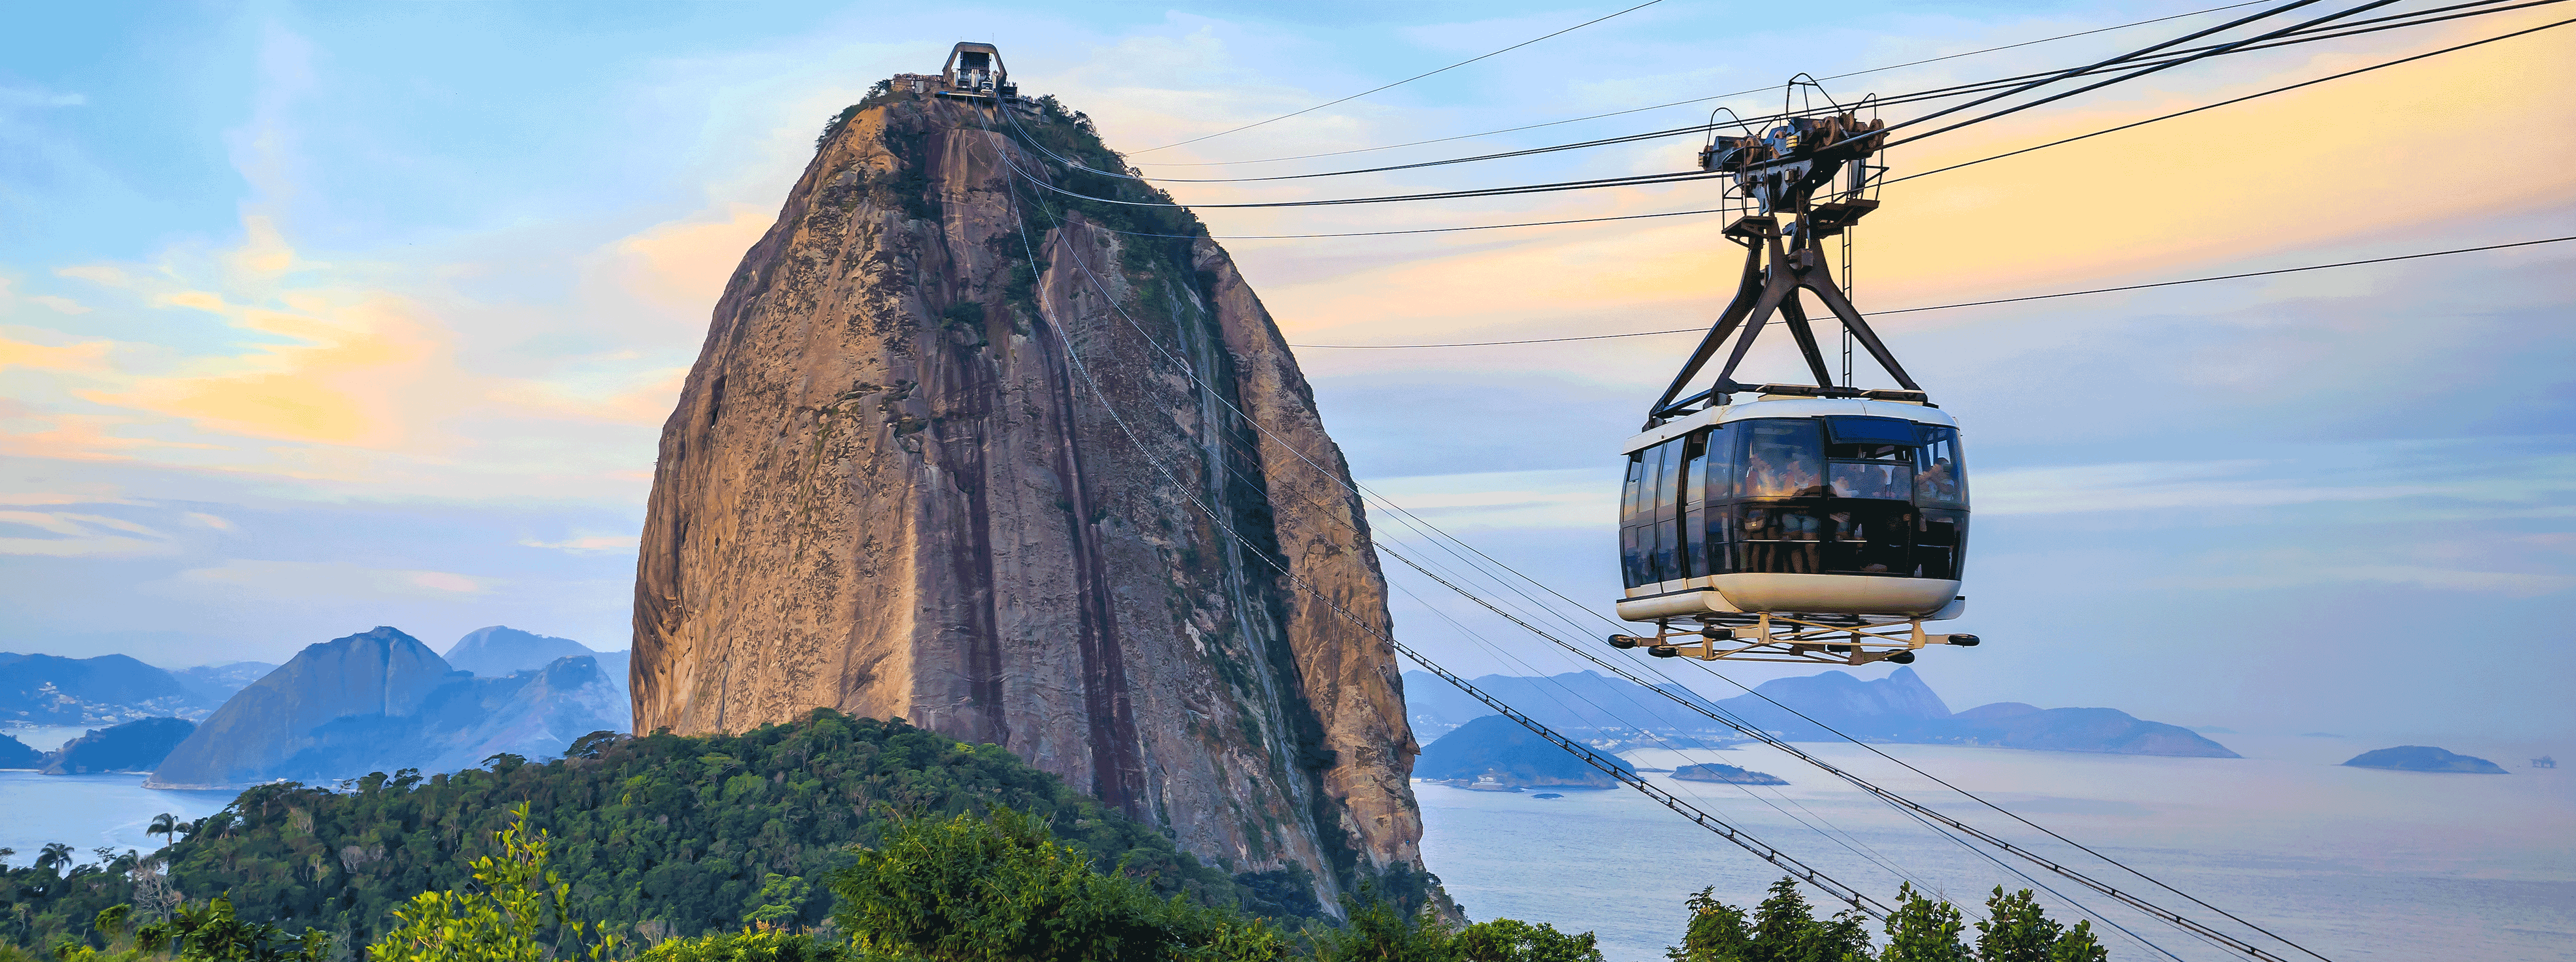 /resource/Images/southamerica/brazil/headerimage/Cable-car-and-Sugar-Loaf-mountain-in-Rio-de-Janeiro.png